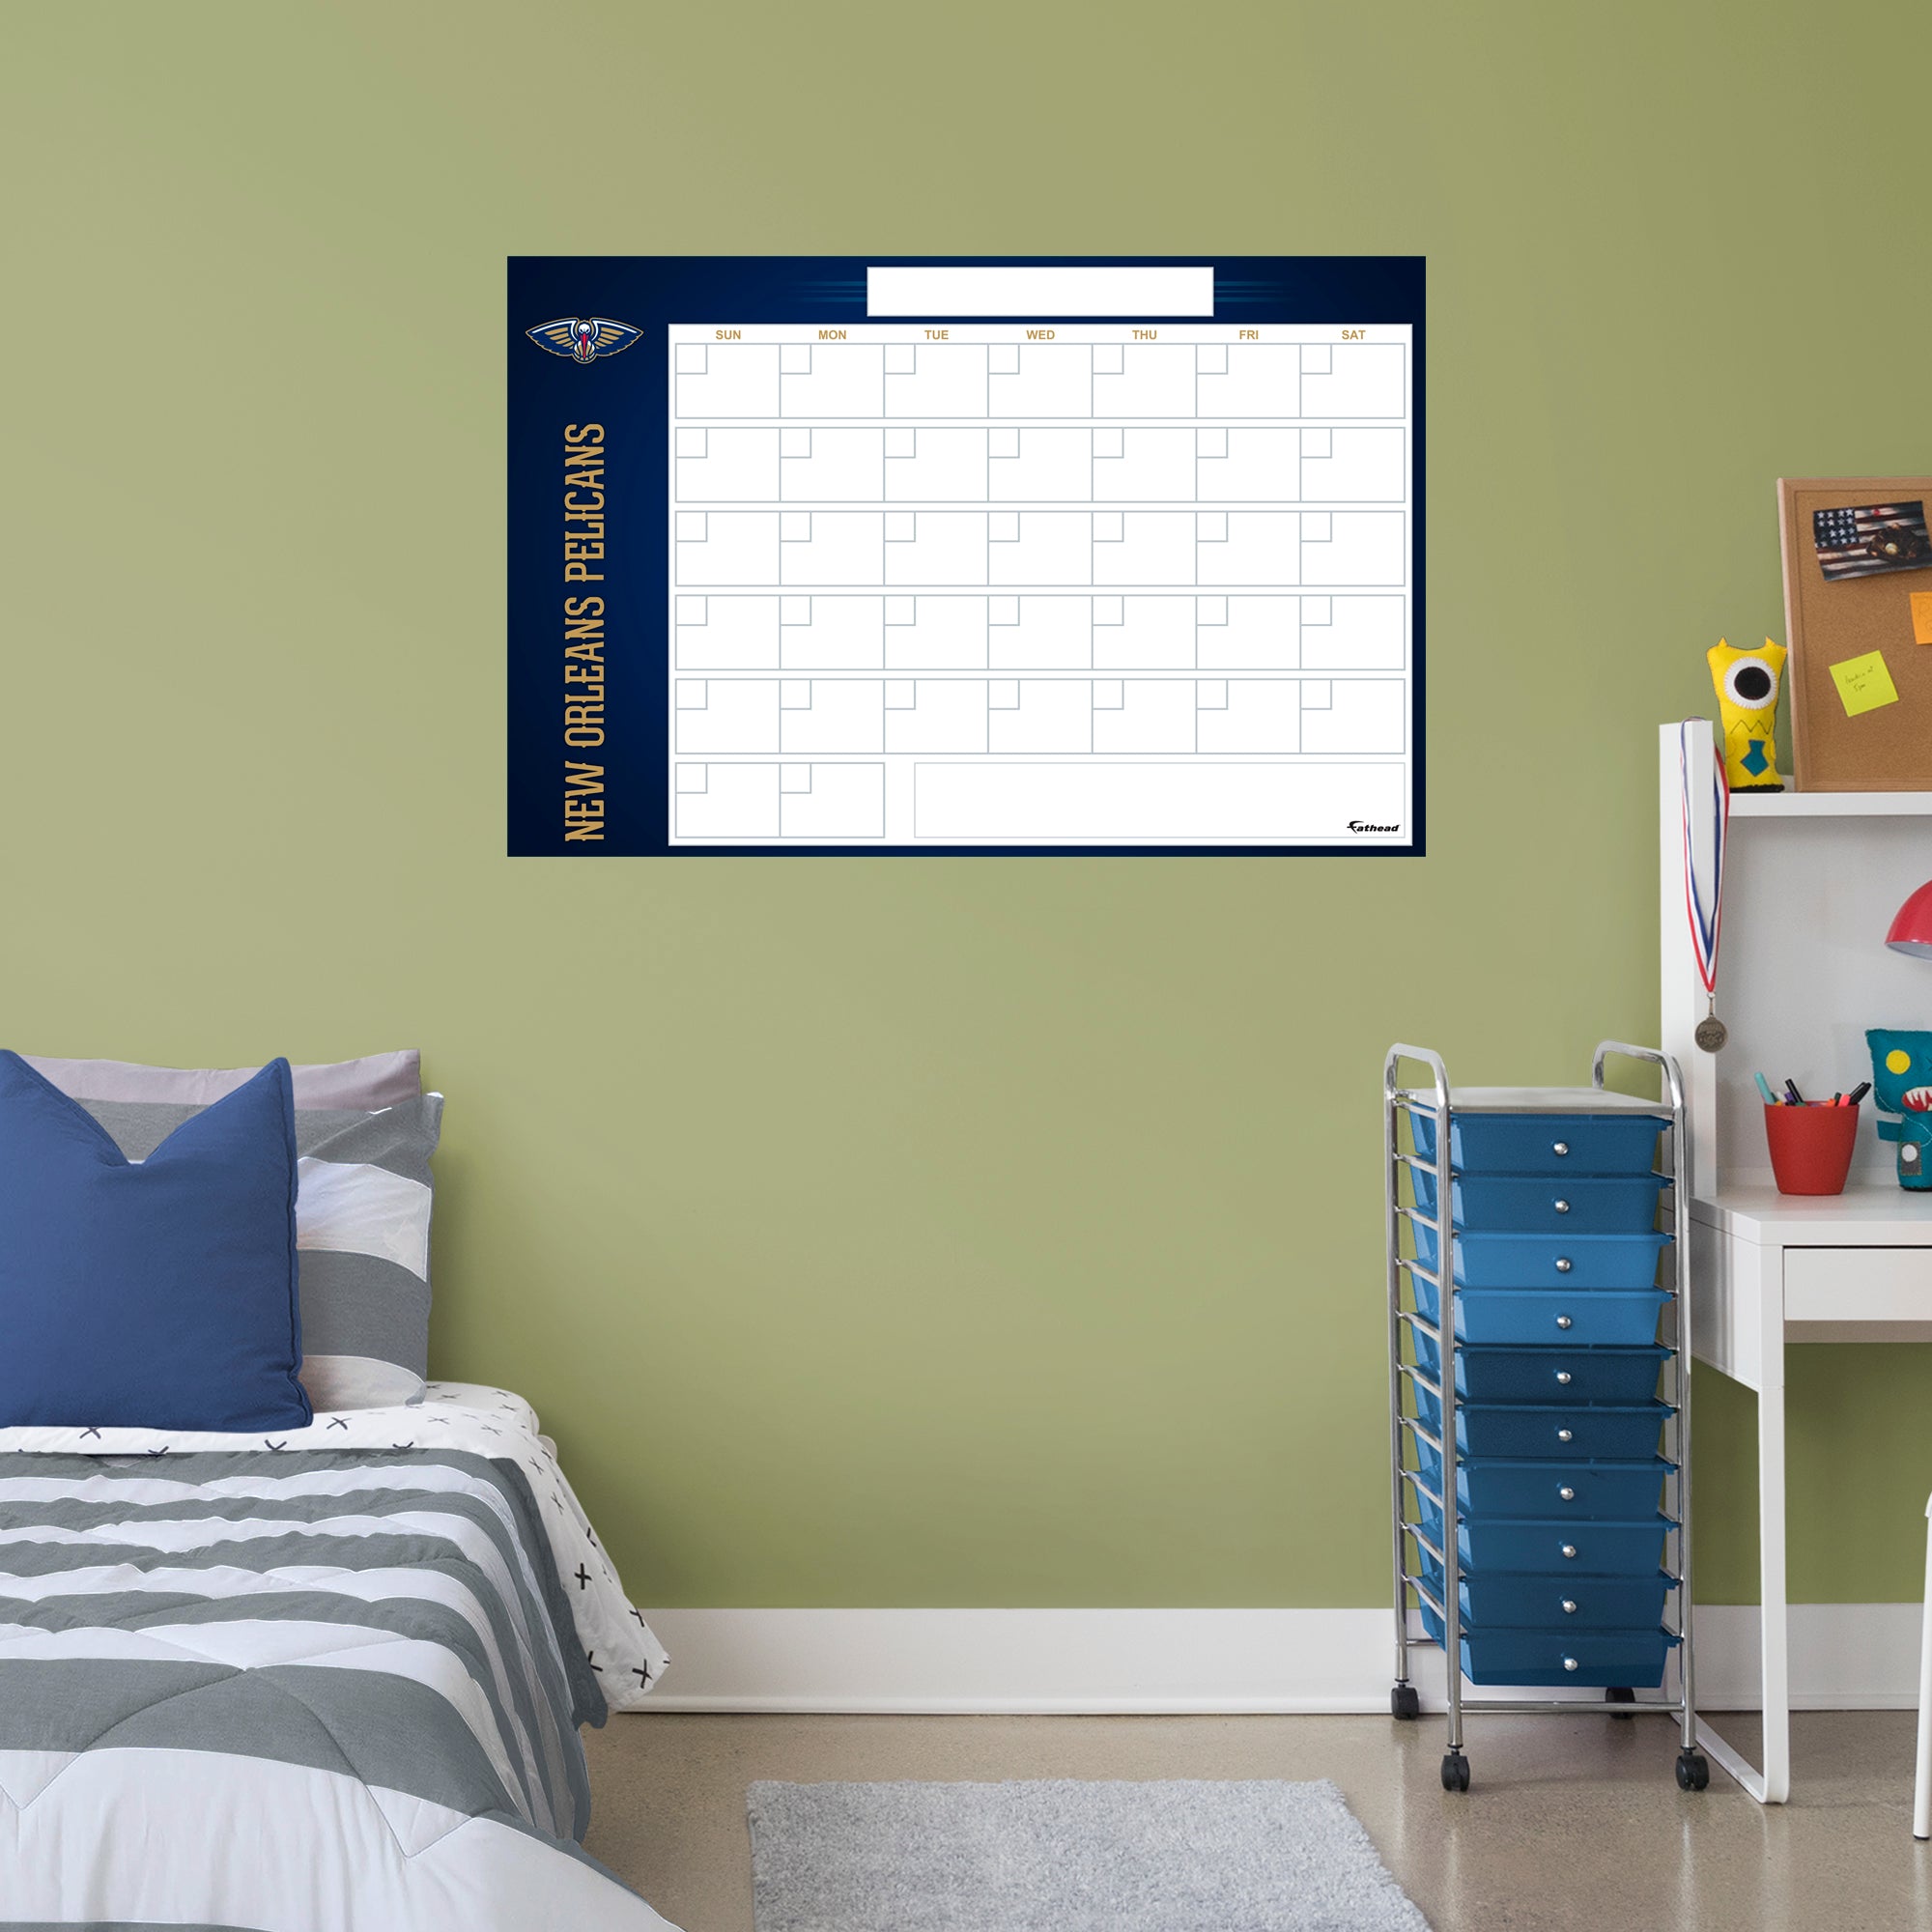 New Orleans Pelicans Dry Erase Calendar - Officially Licensed NBA Removable Wall Decal Giant Decal (34"W x 52"H) by Fathead | Vi